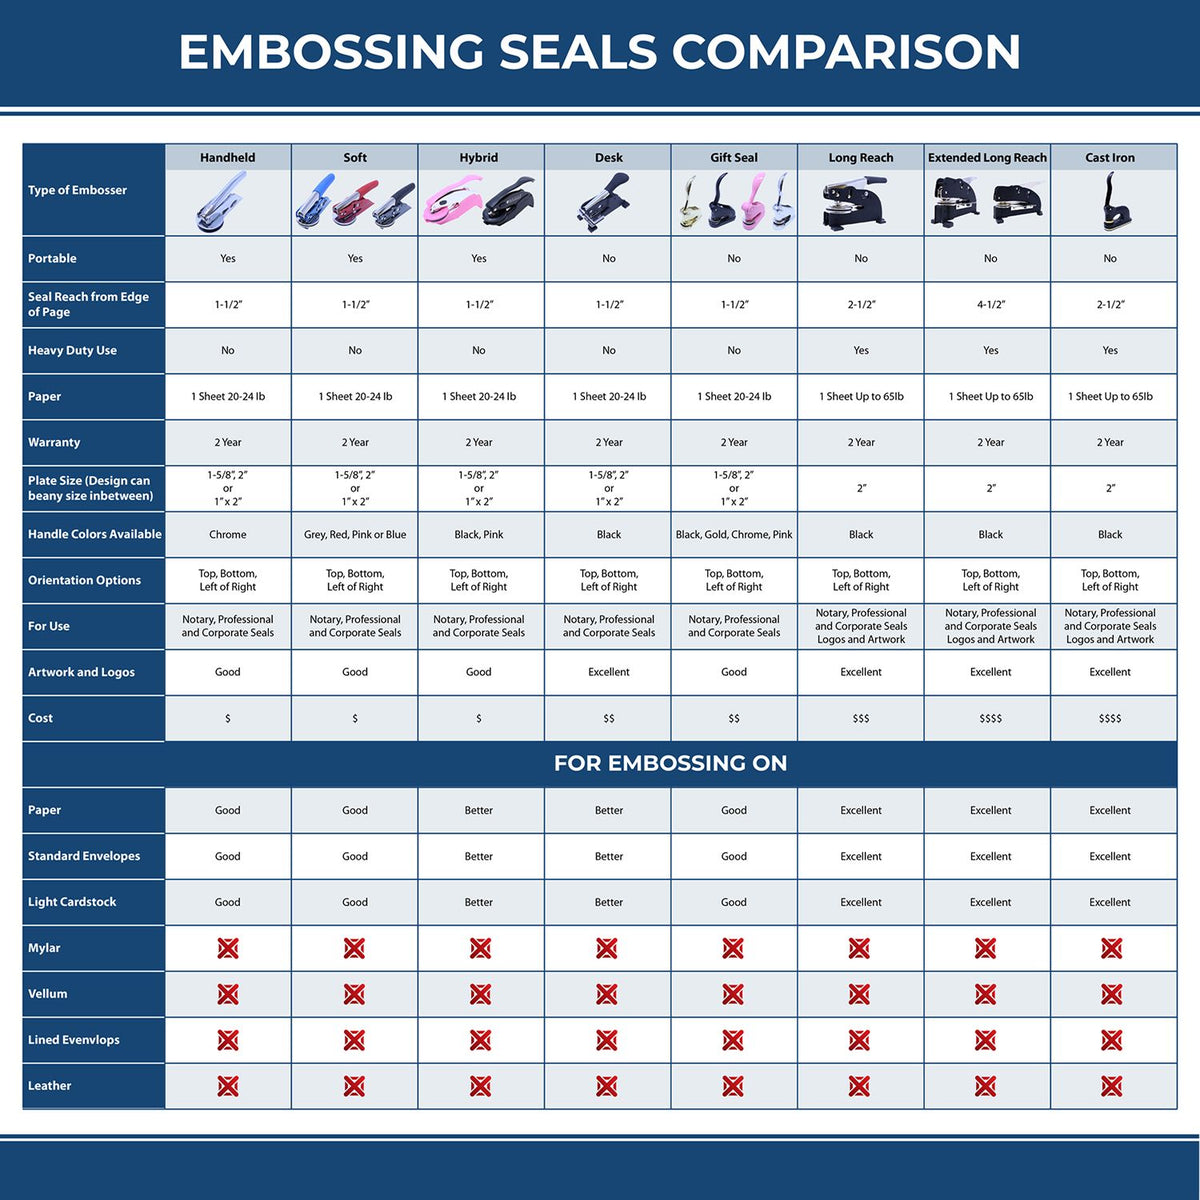 A comparison chart for the different types of mount models available for the Long Reach New Jersey Geology Seal